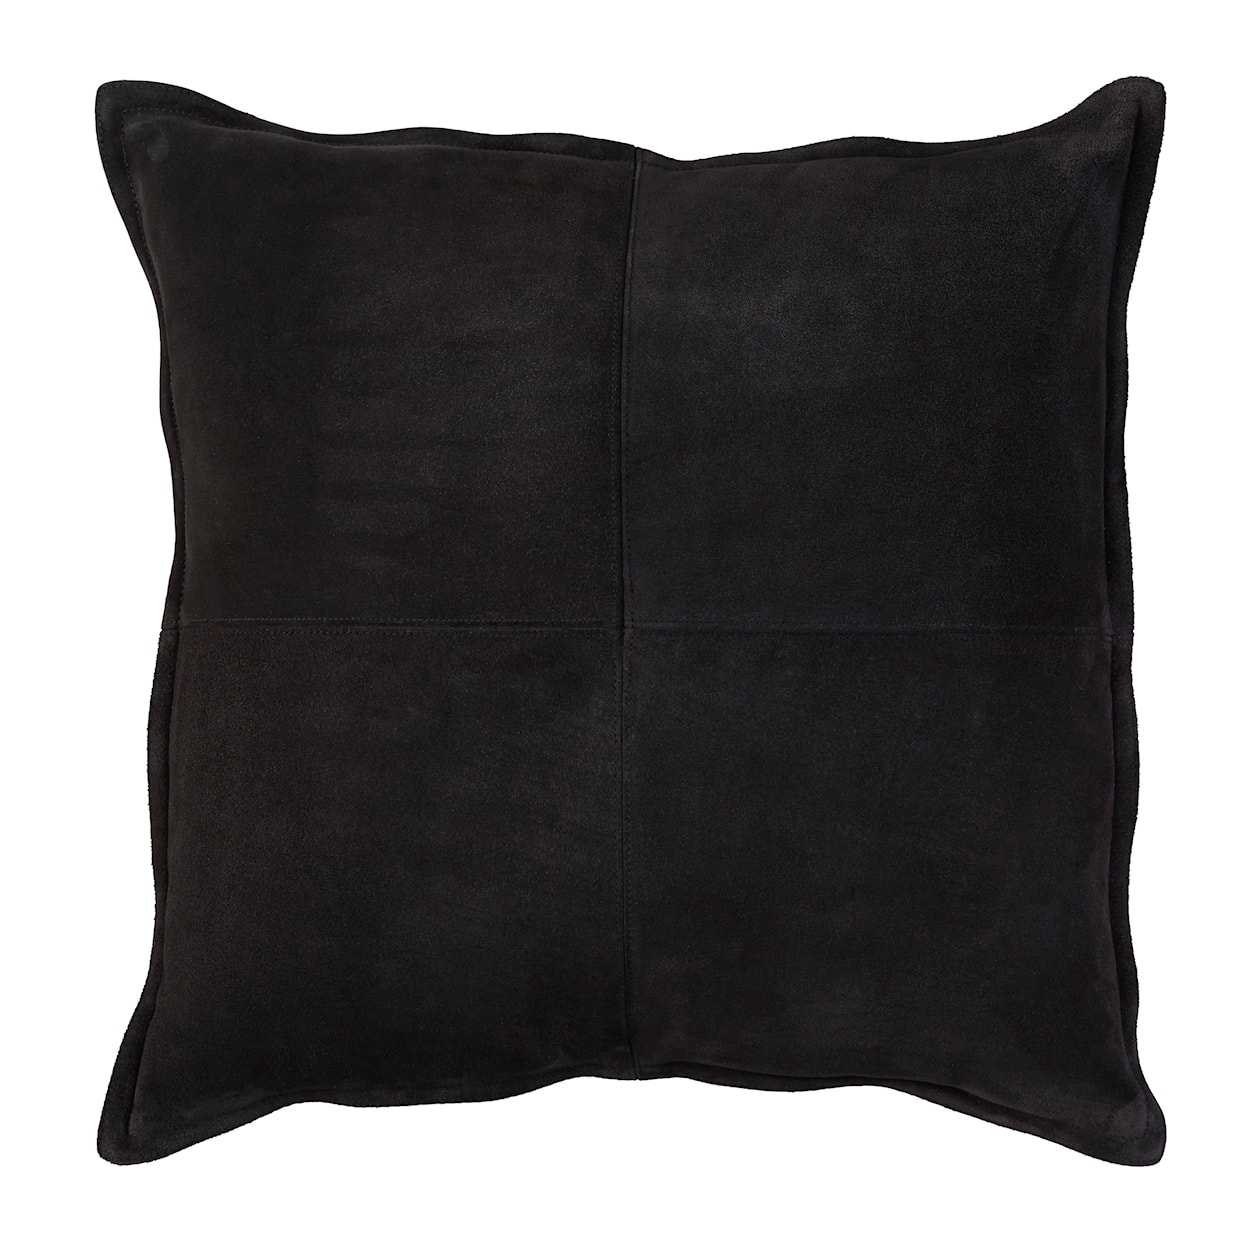 Signature Design by Ashley Pillows Rayvale Charcoal Pillow